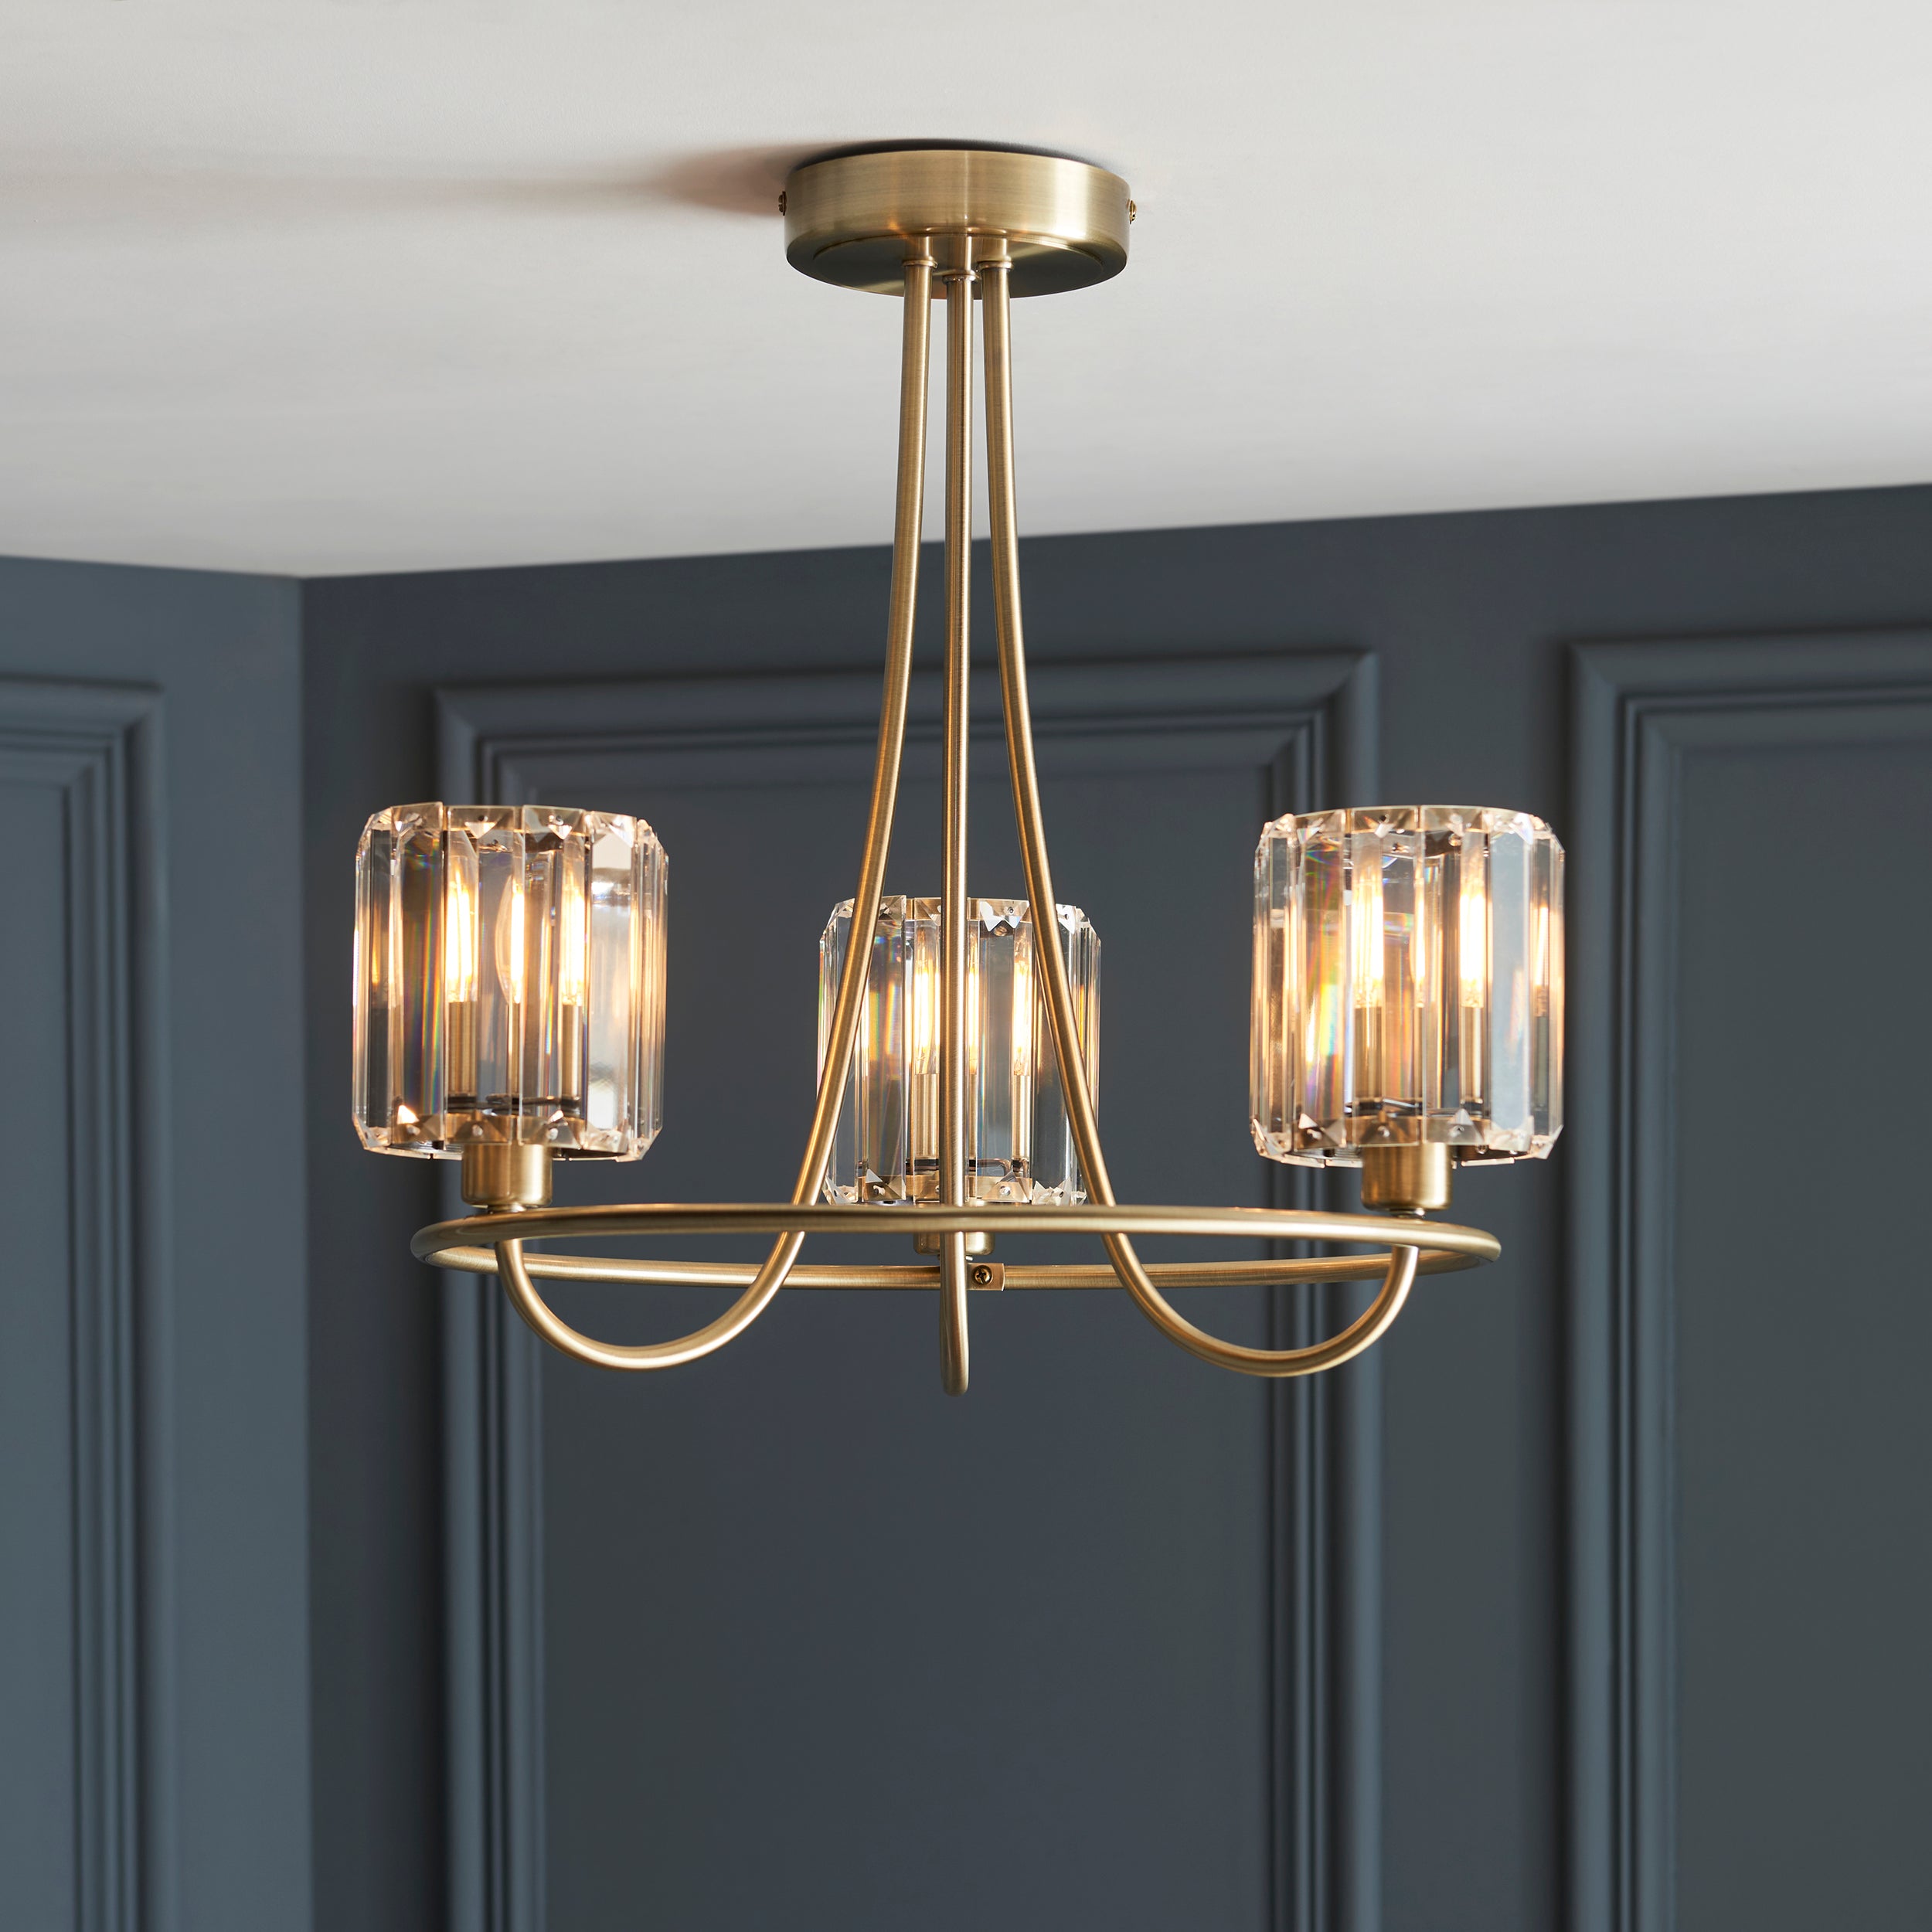 Berenice Sophisticated Antique Brass Ceiling Light